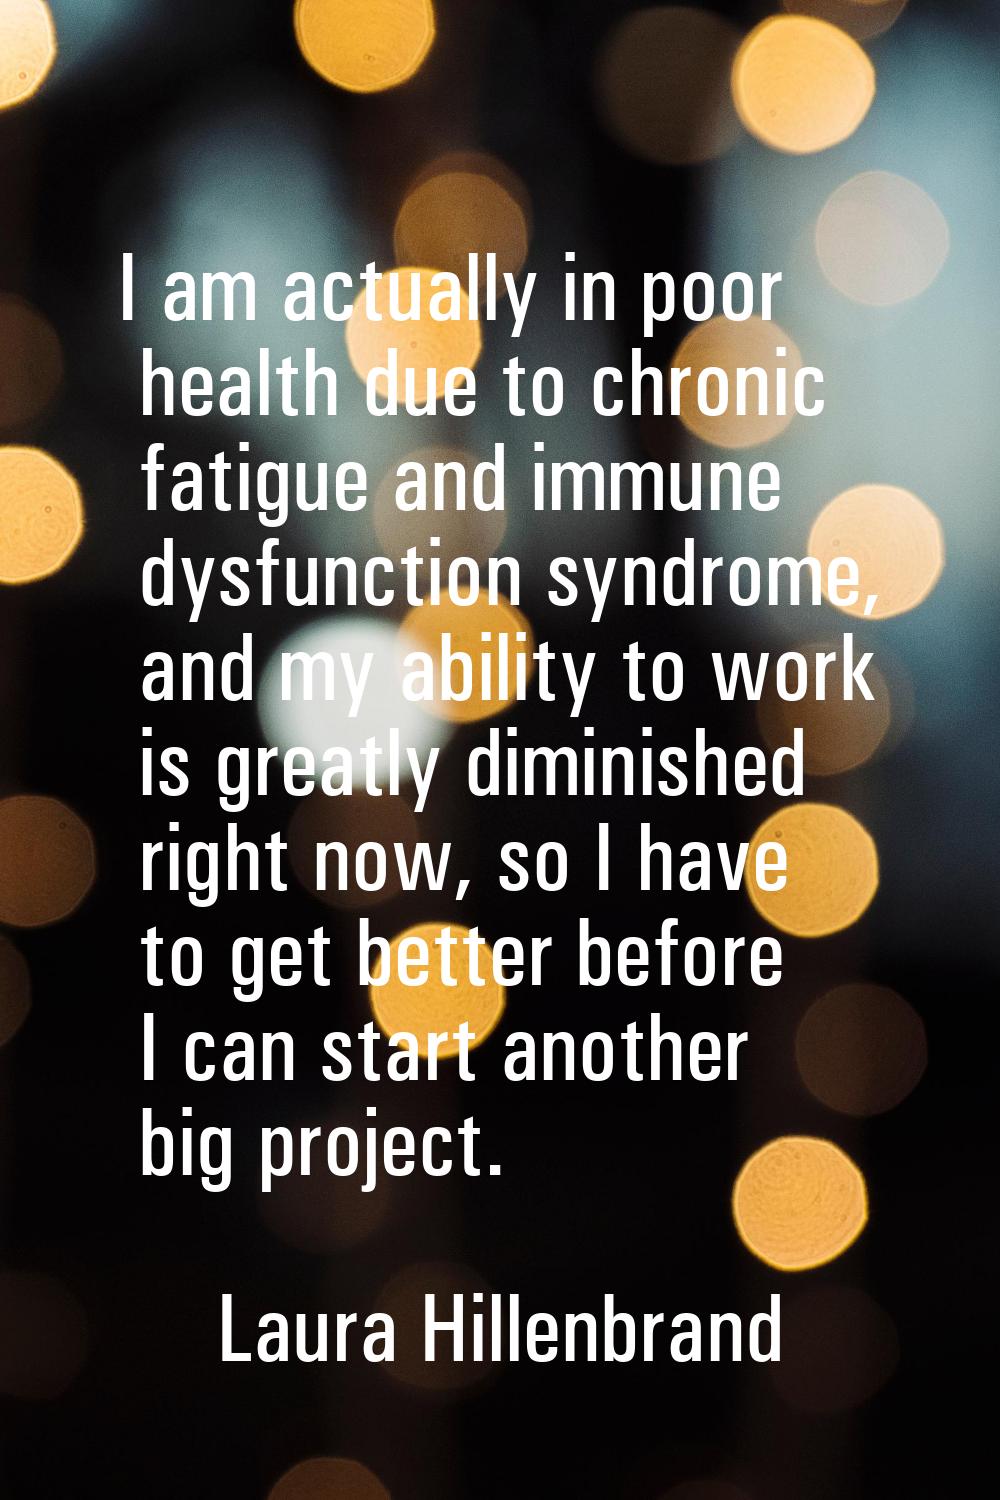 I am actually in poor health due to chronic fatigue and immune dysfunction syndrome, and my ability